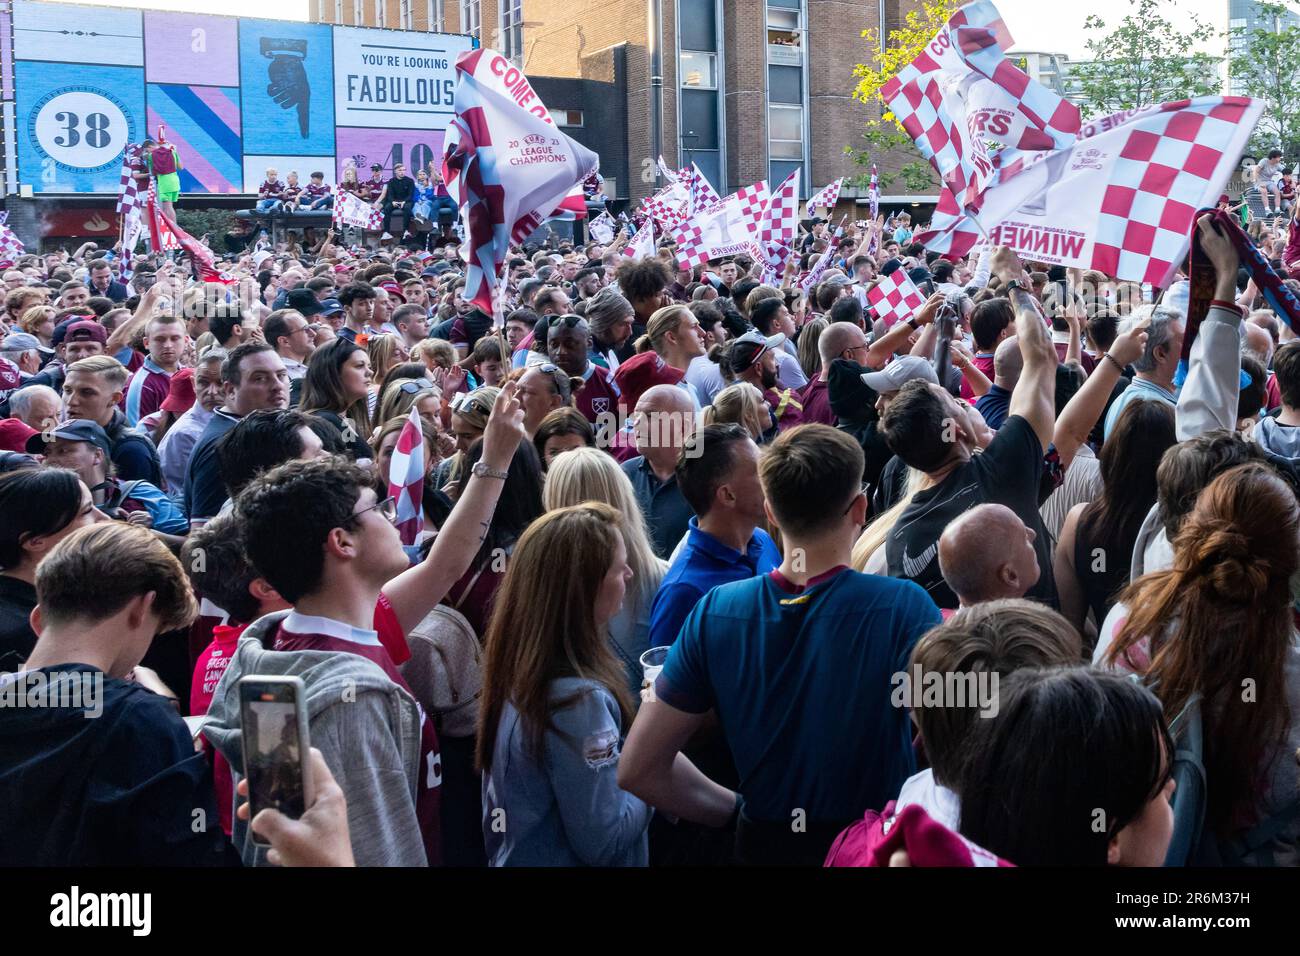 London, UK. 8th June, 2023. Supporters of West Ham United gather outside Stratford Town Hall to await the arrival of the team following a UEFA Europa Conference League victory parade from the site of the club's former Boleyn Ground stadium in Upton Park. West Ham defeated ACF Fiorentina in the UEFA Europa Conference League Final on 7 June, winning their first major trophy since 1980. Credit: Mark Kerrison/Alamy Live News Stock Photo